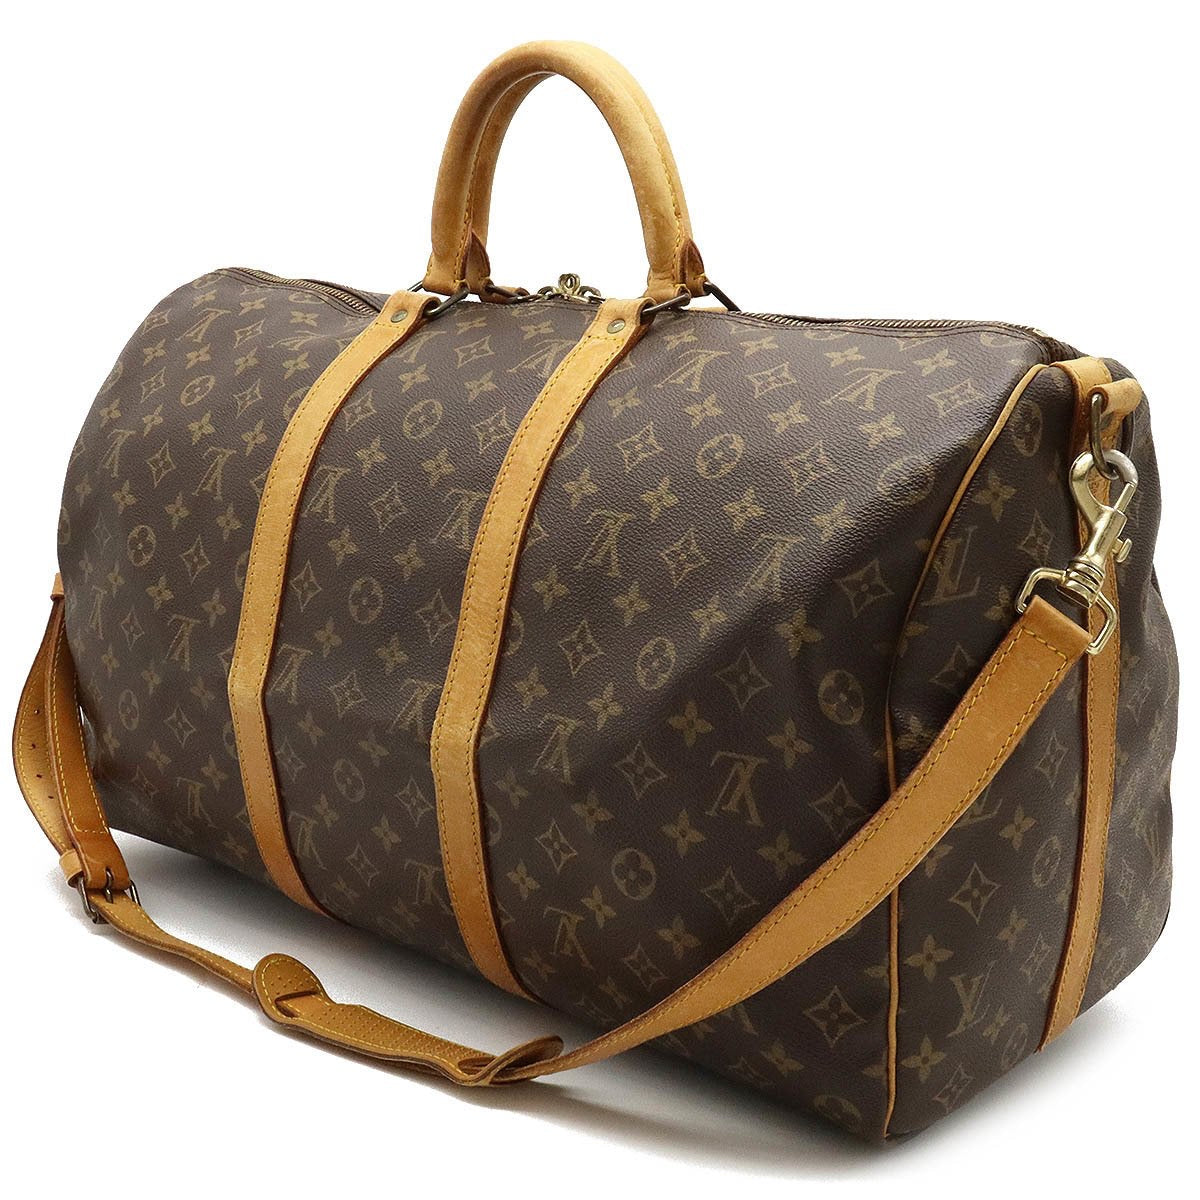 Authenticated Used Louis Vuitton Damier Neverfull PM N41359 Tote